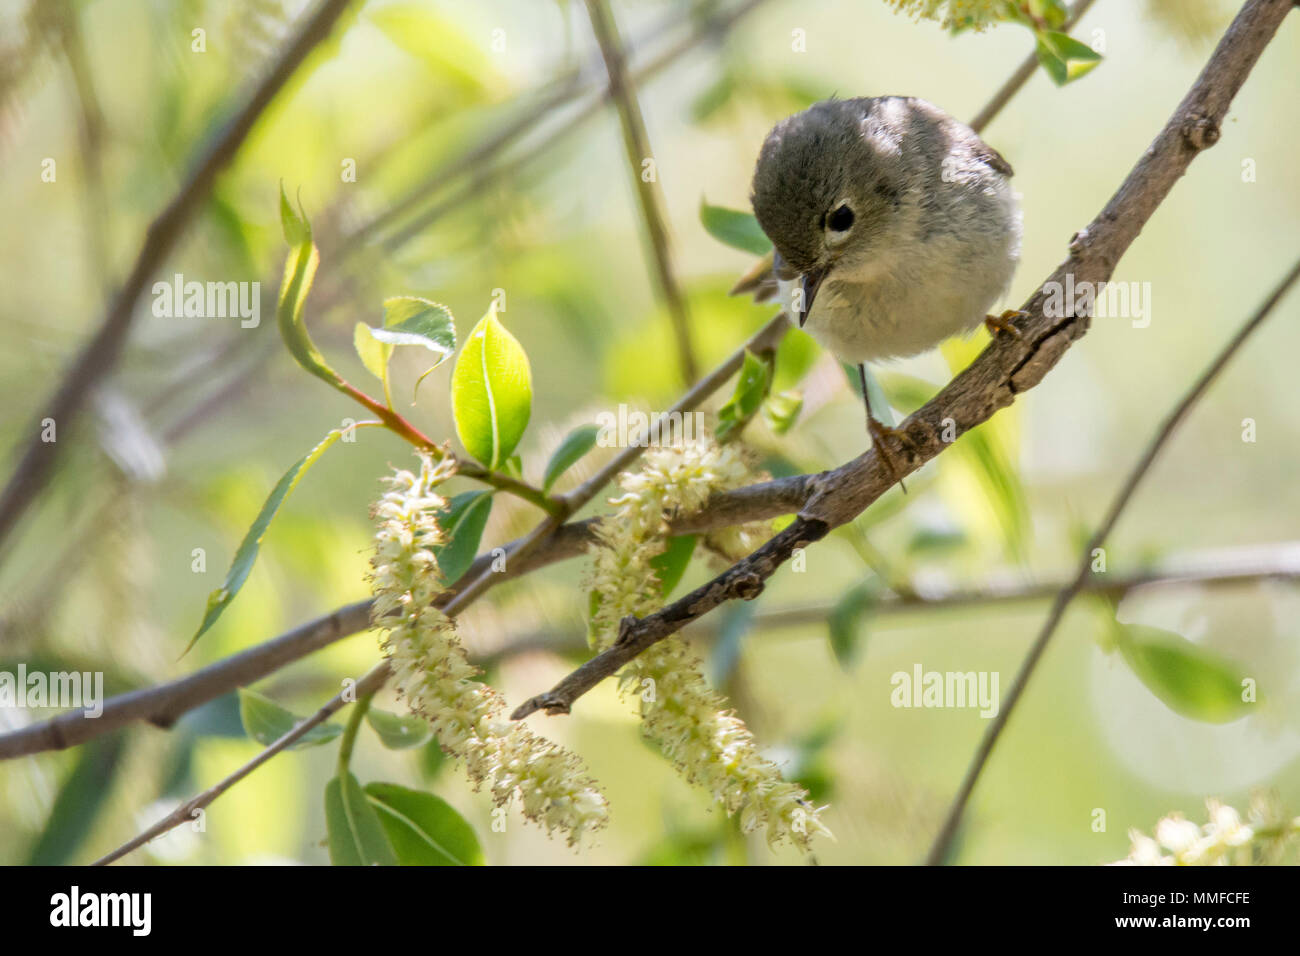 A tiny, long-tailed bird of broad leaf forests and scrub lands, the Blue-gray Gnatcatcher makes itself known by its soft but insistent calls. Stock Photo